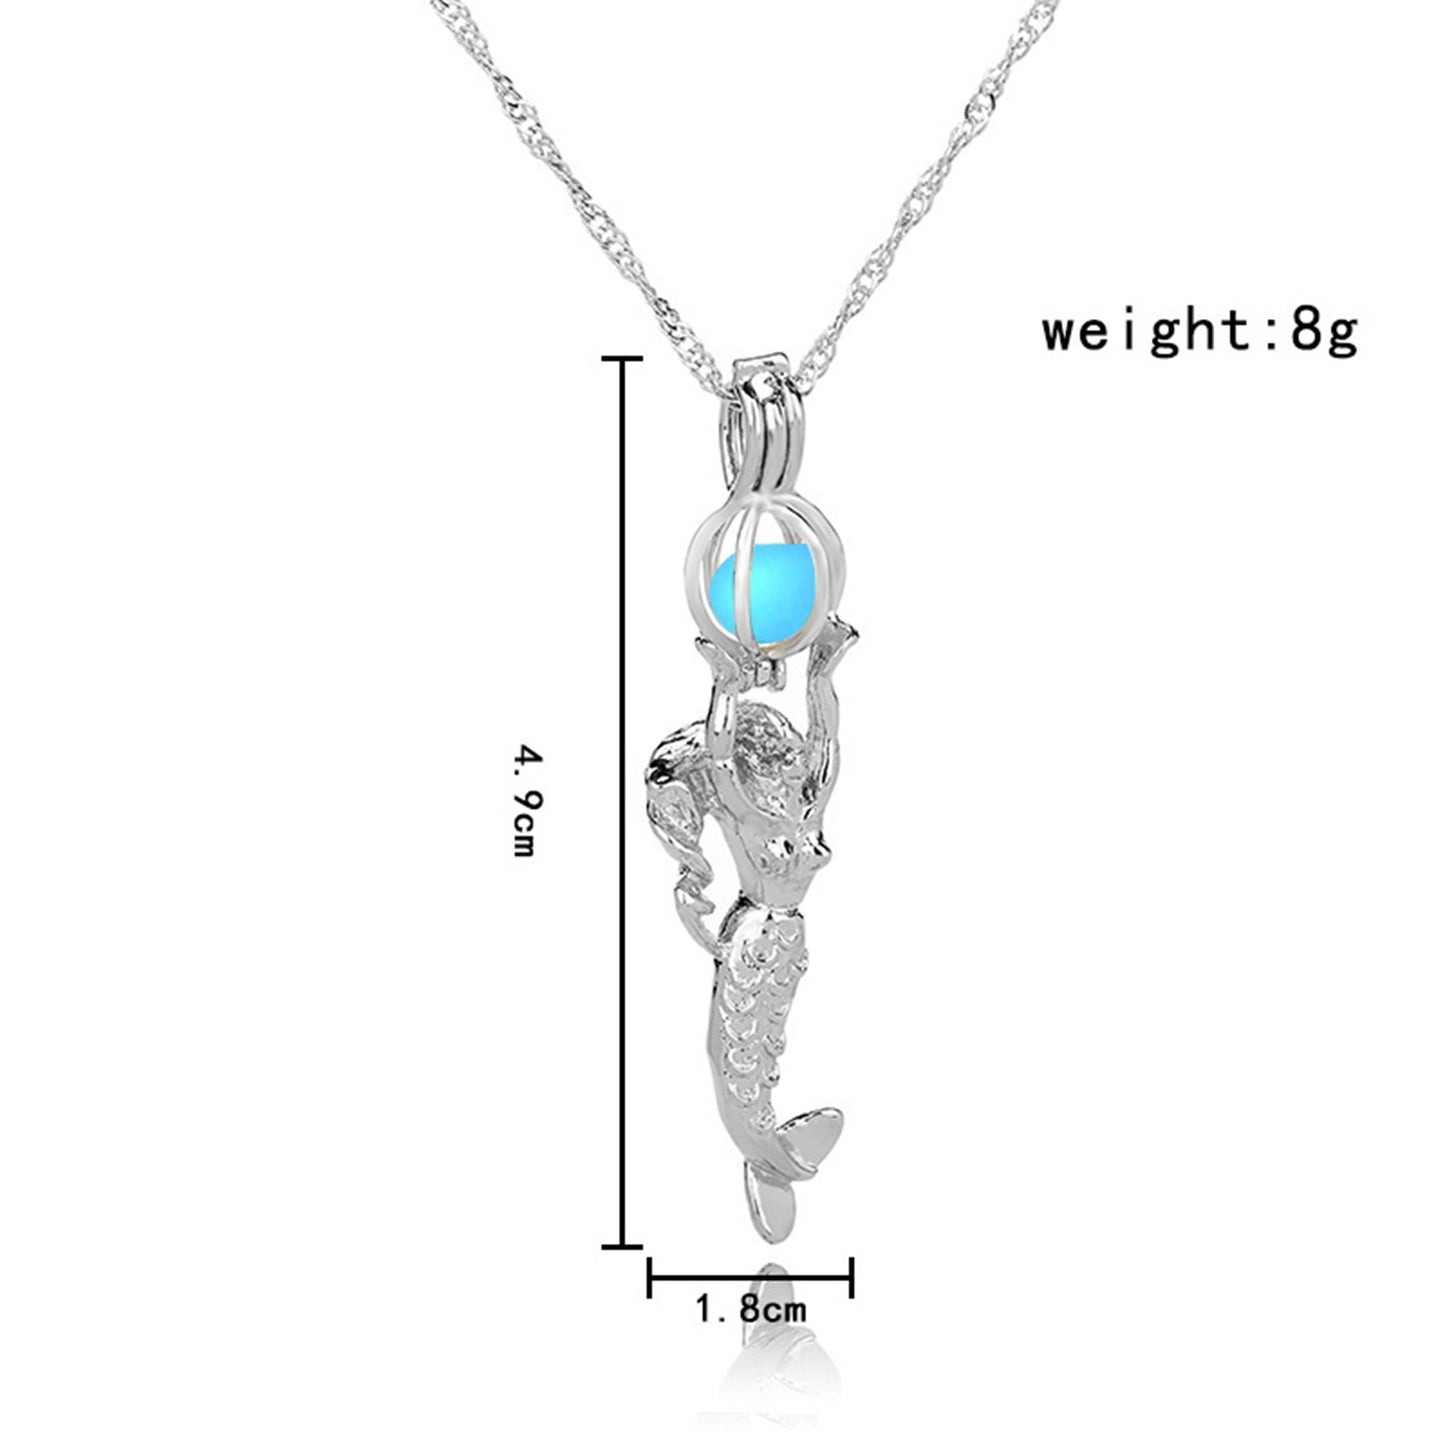 Summer Jewelry Mermaid Pendant Necklace Glow in the Dark Choker Necklace 3 Colors Luminous For Women Gift Silver Color Chain